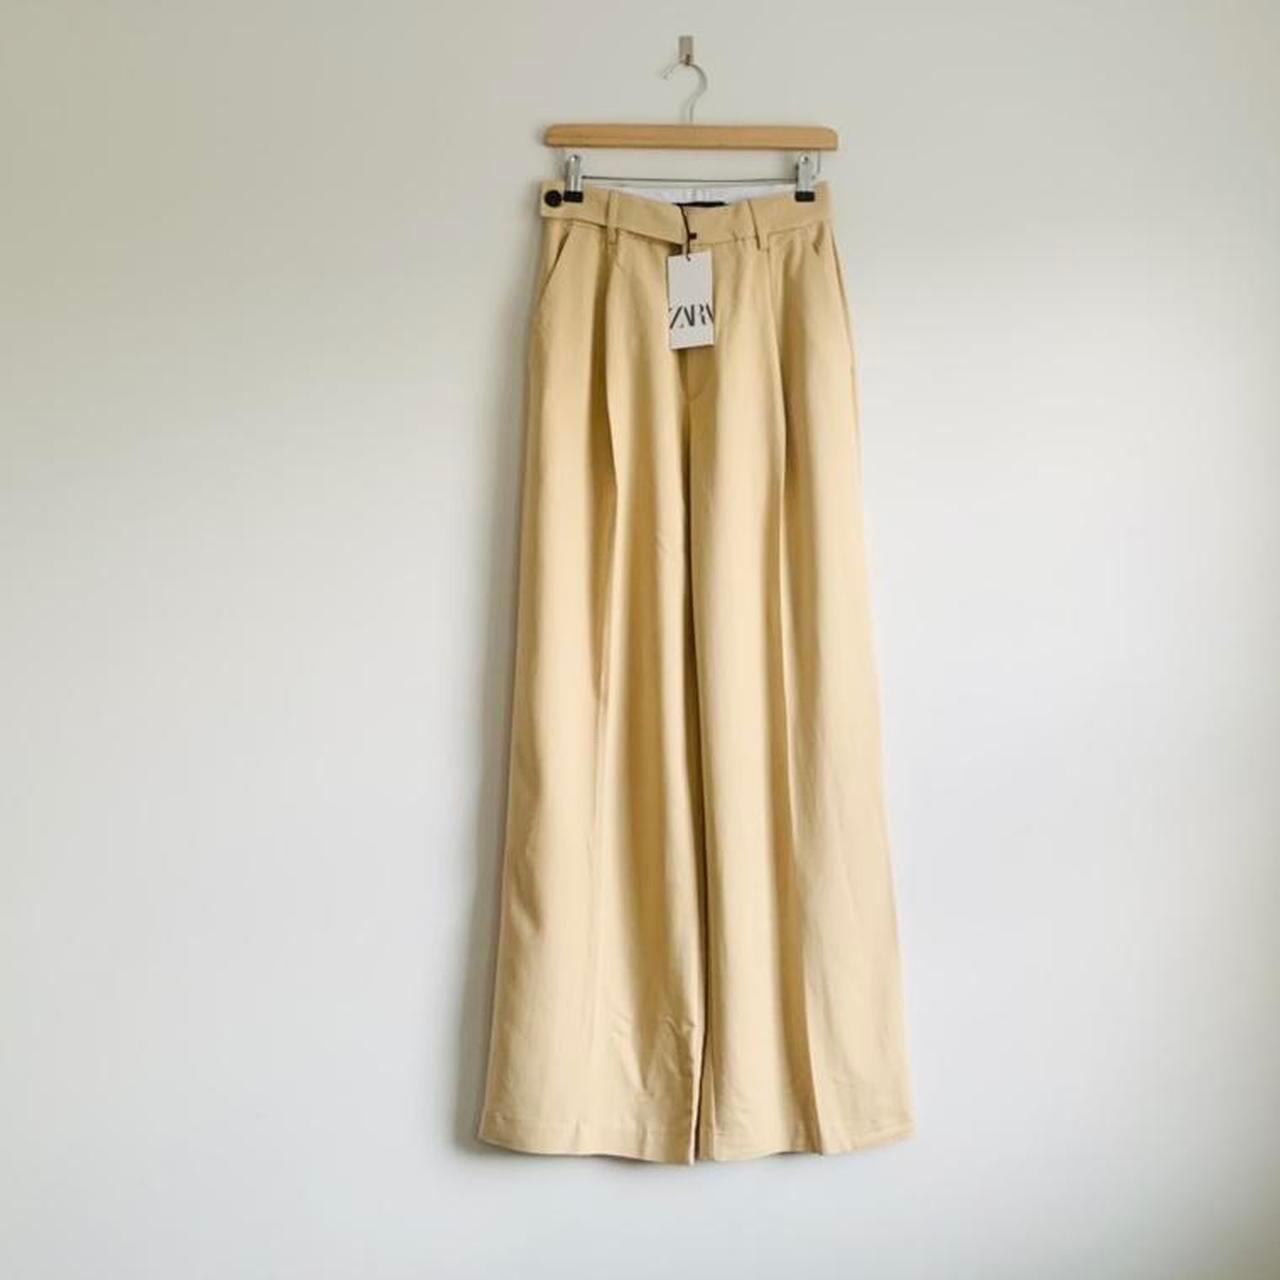 Wide leg Zara pants, size XS. New with tags. The - Depop